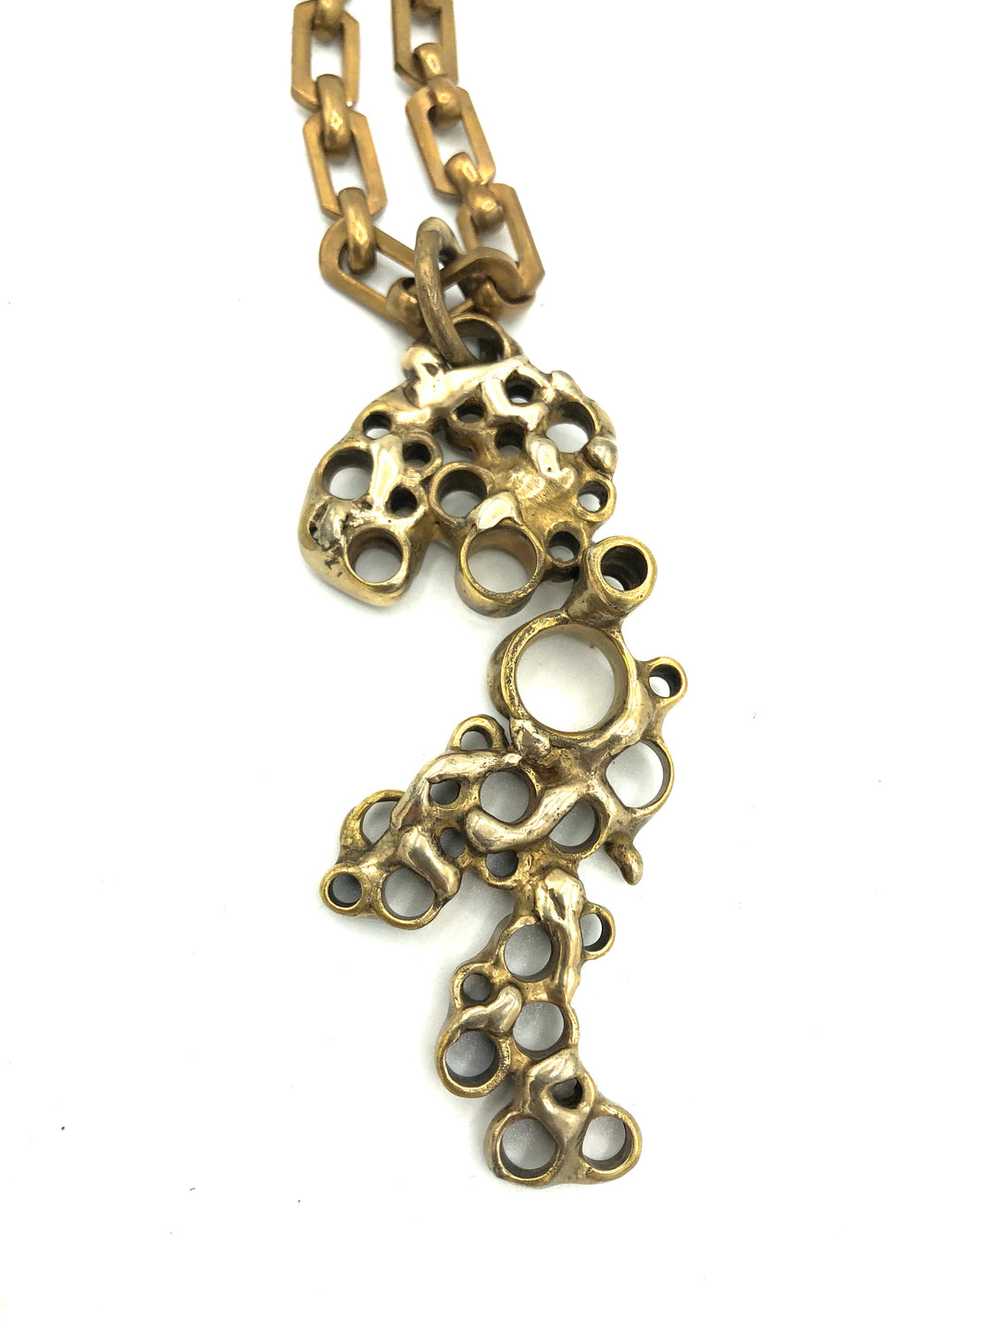 1960s/70s Brutalist Bronze and Brass Necklace - image 2